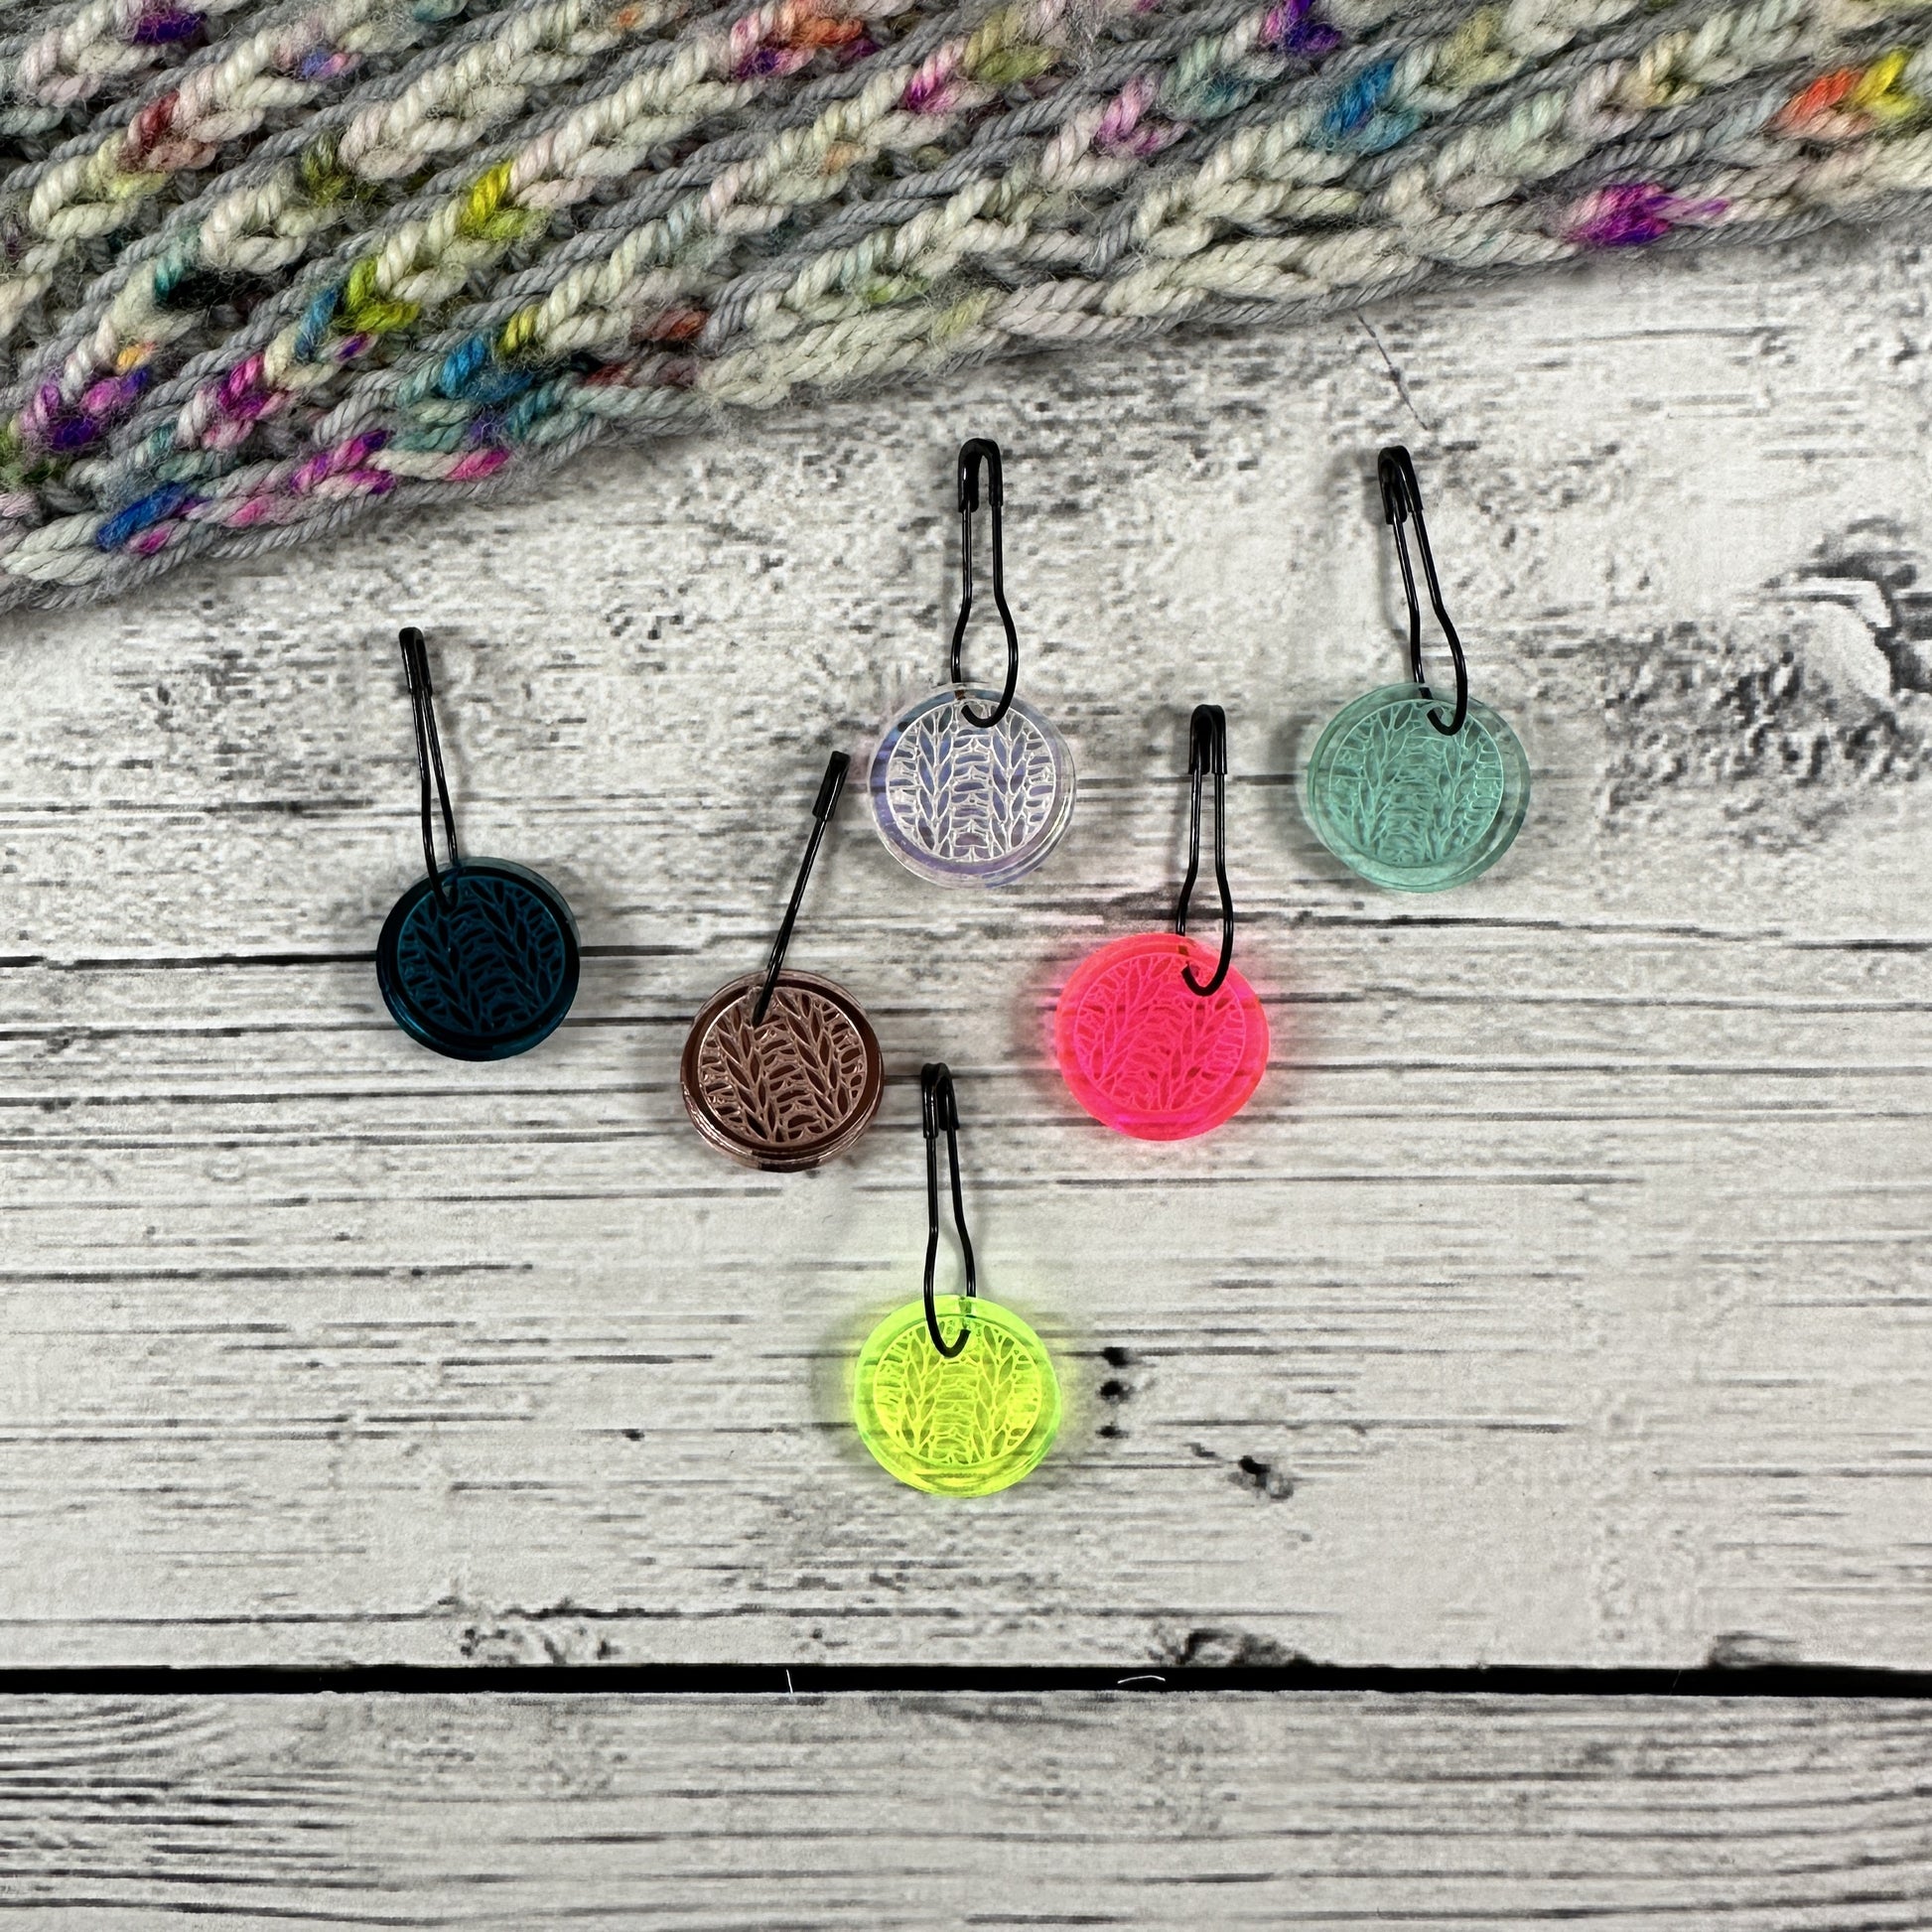 How to Choose and Use Stitch Markers in Knitting